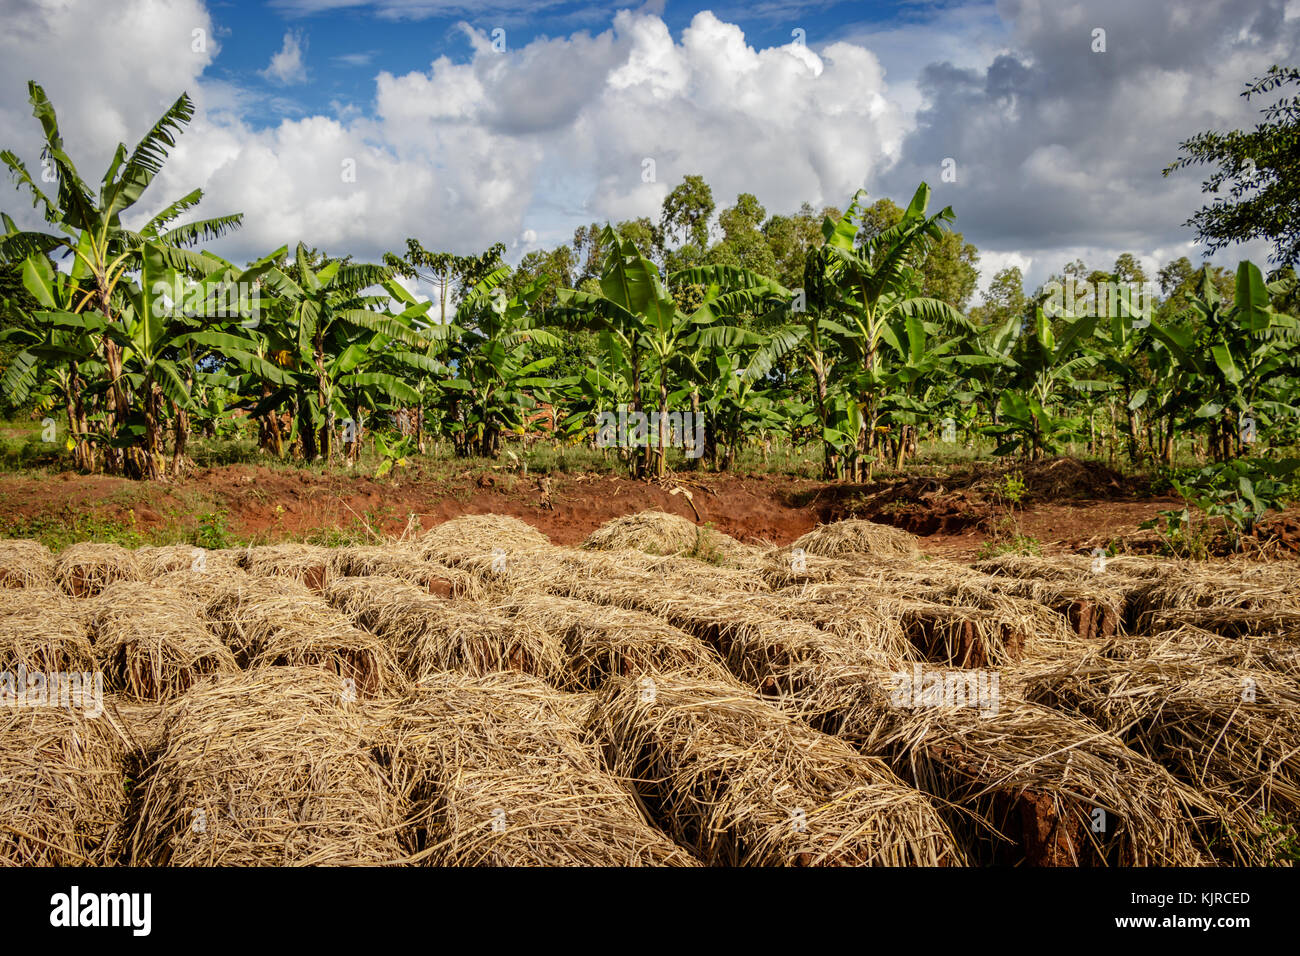 Drying mud bricks in Uganda. The straw is used to keep the mud bricks protected for rain and sun. A brick is building material used to make walls, pav Stock Photo